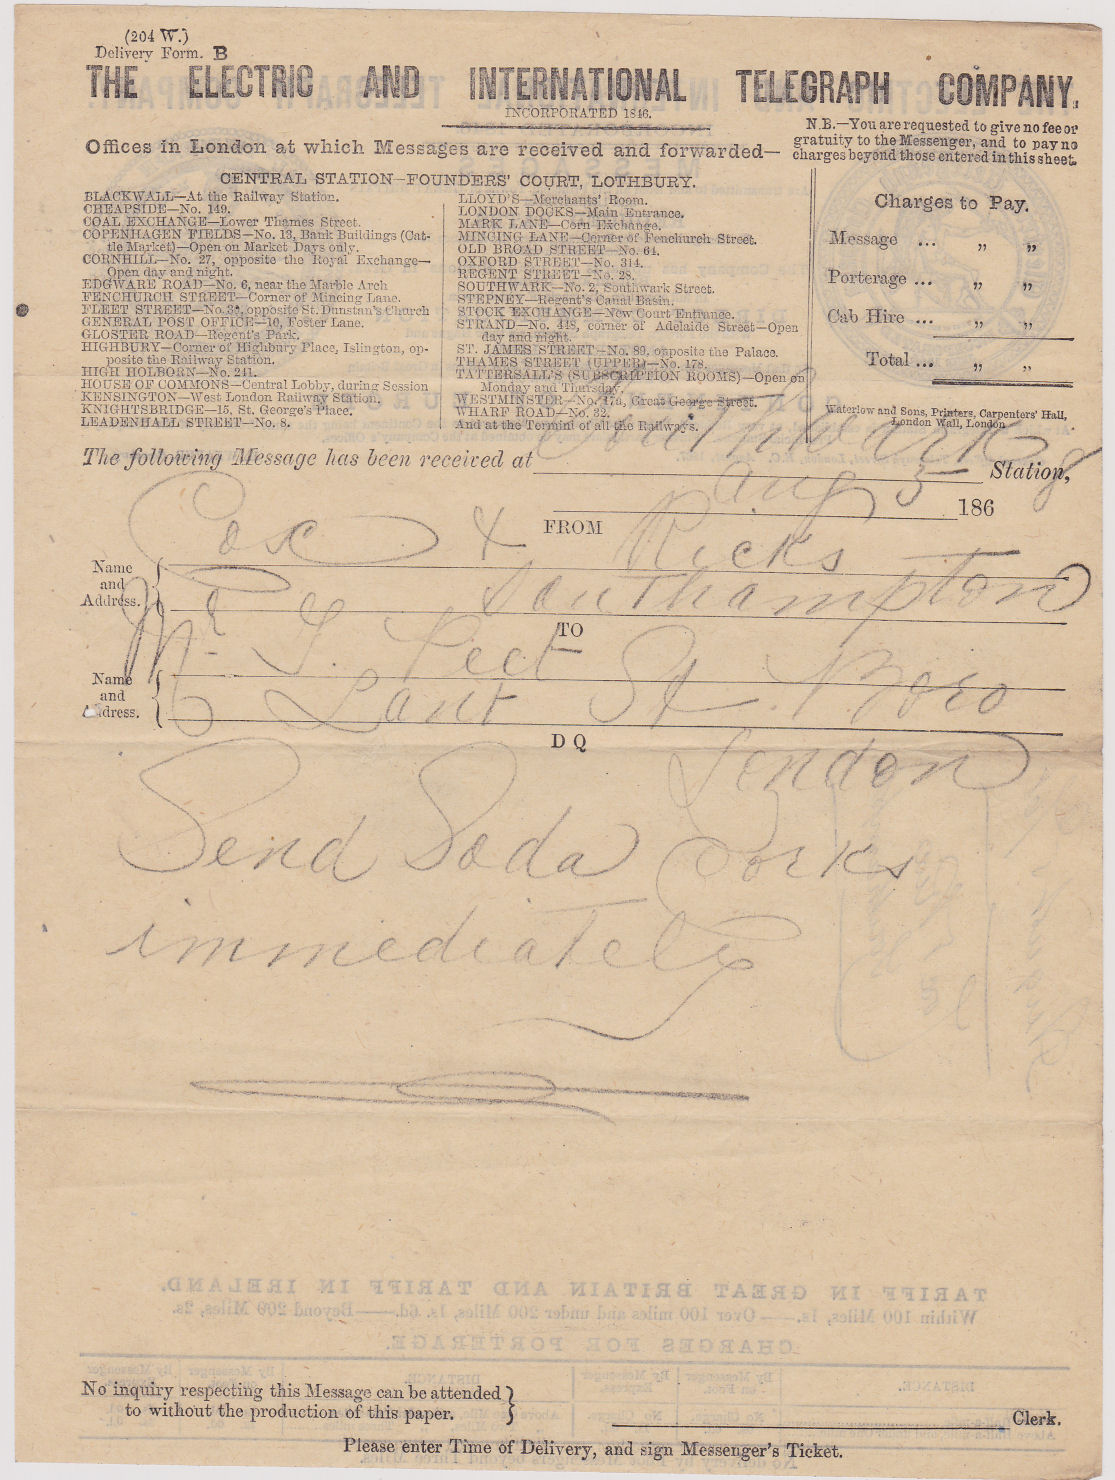 Electric Telegraph Company Form B - front.